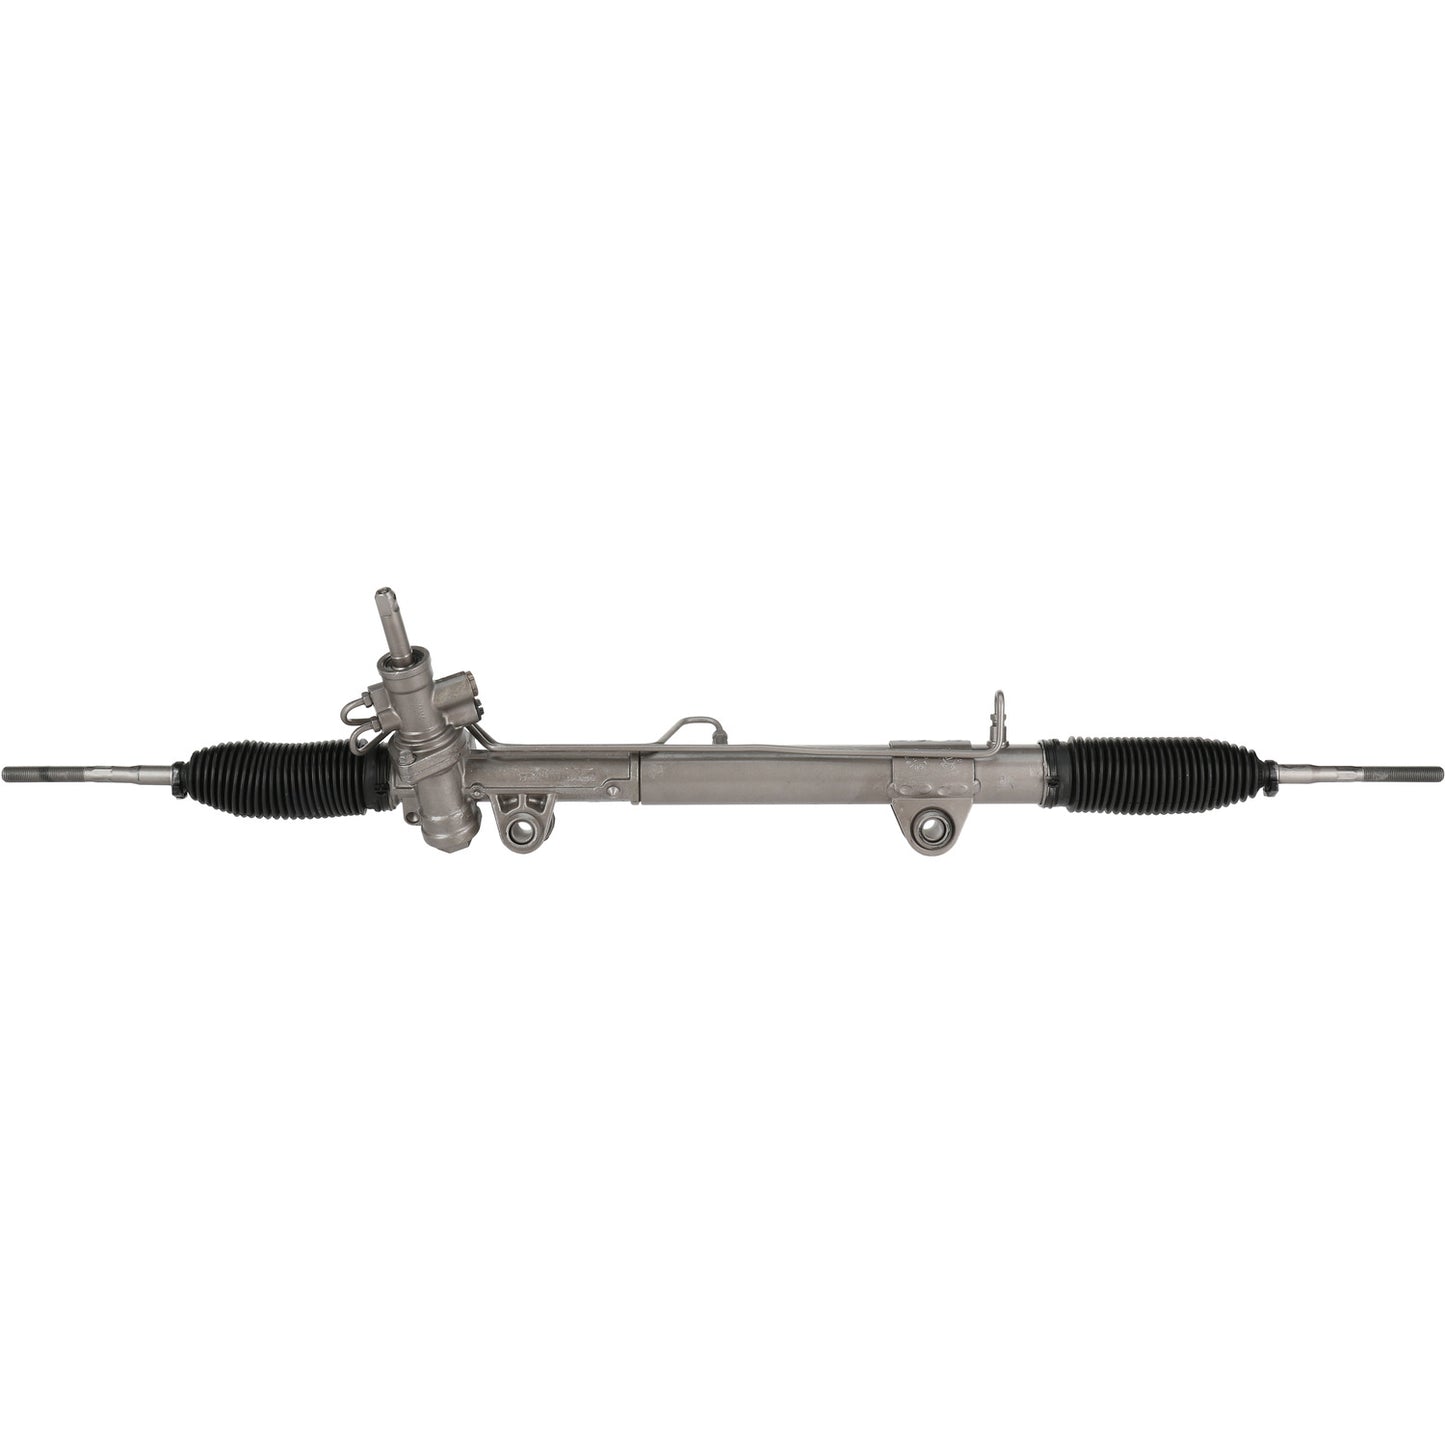 Rack and Pinion Assembly - MAVAL - Hydraulic Power - Remanufactured - 95338M